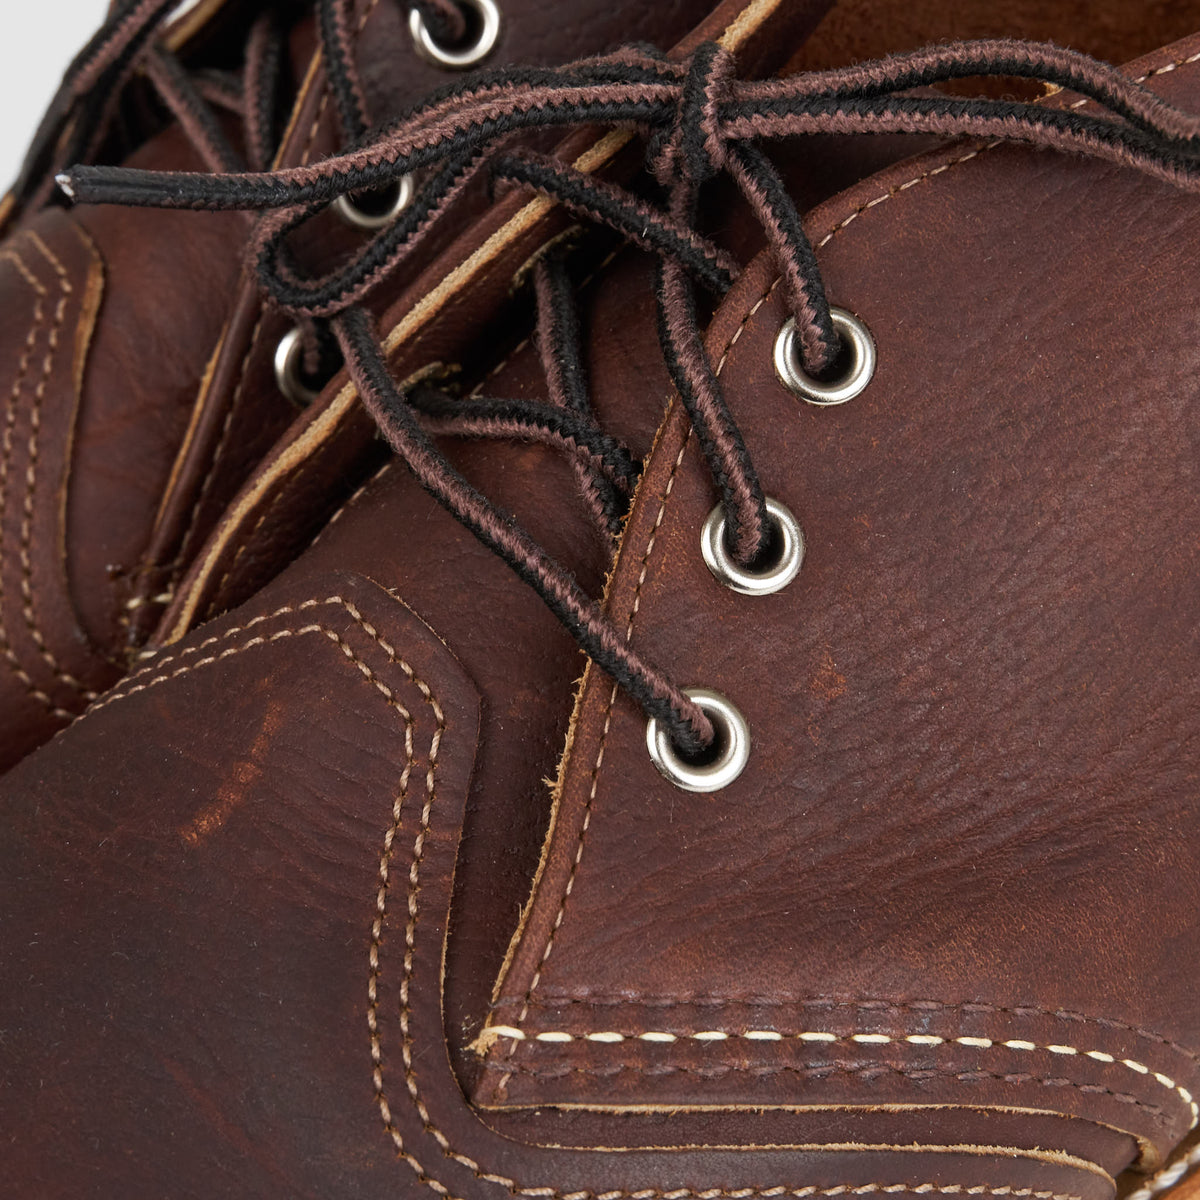 Red Wing Heritage Shoes Chukka 03141